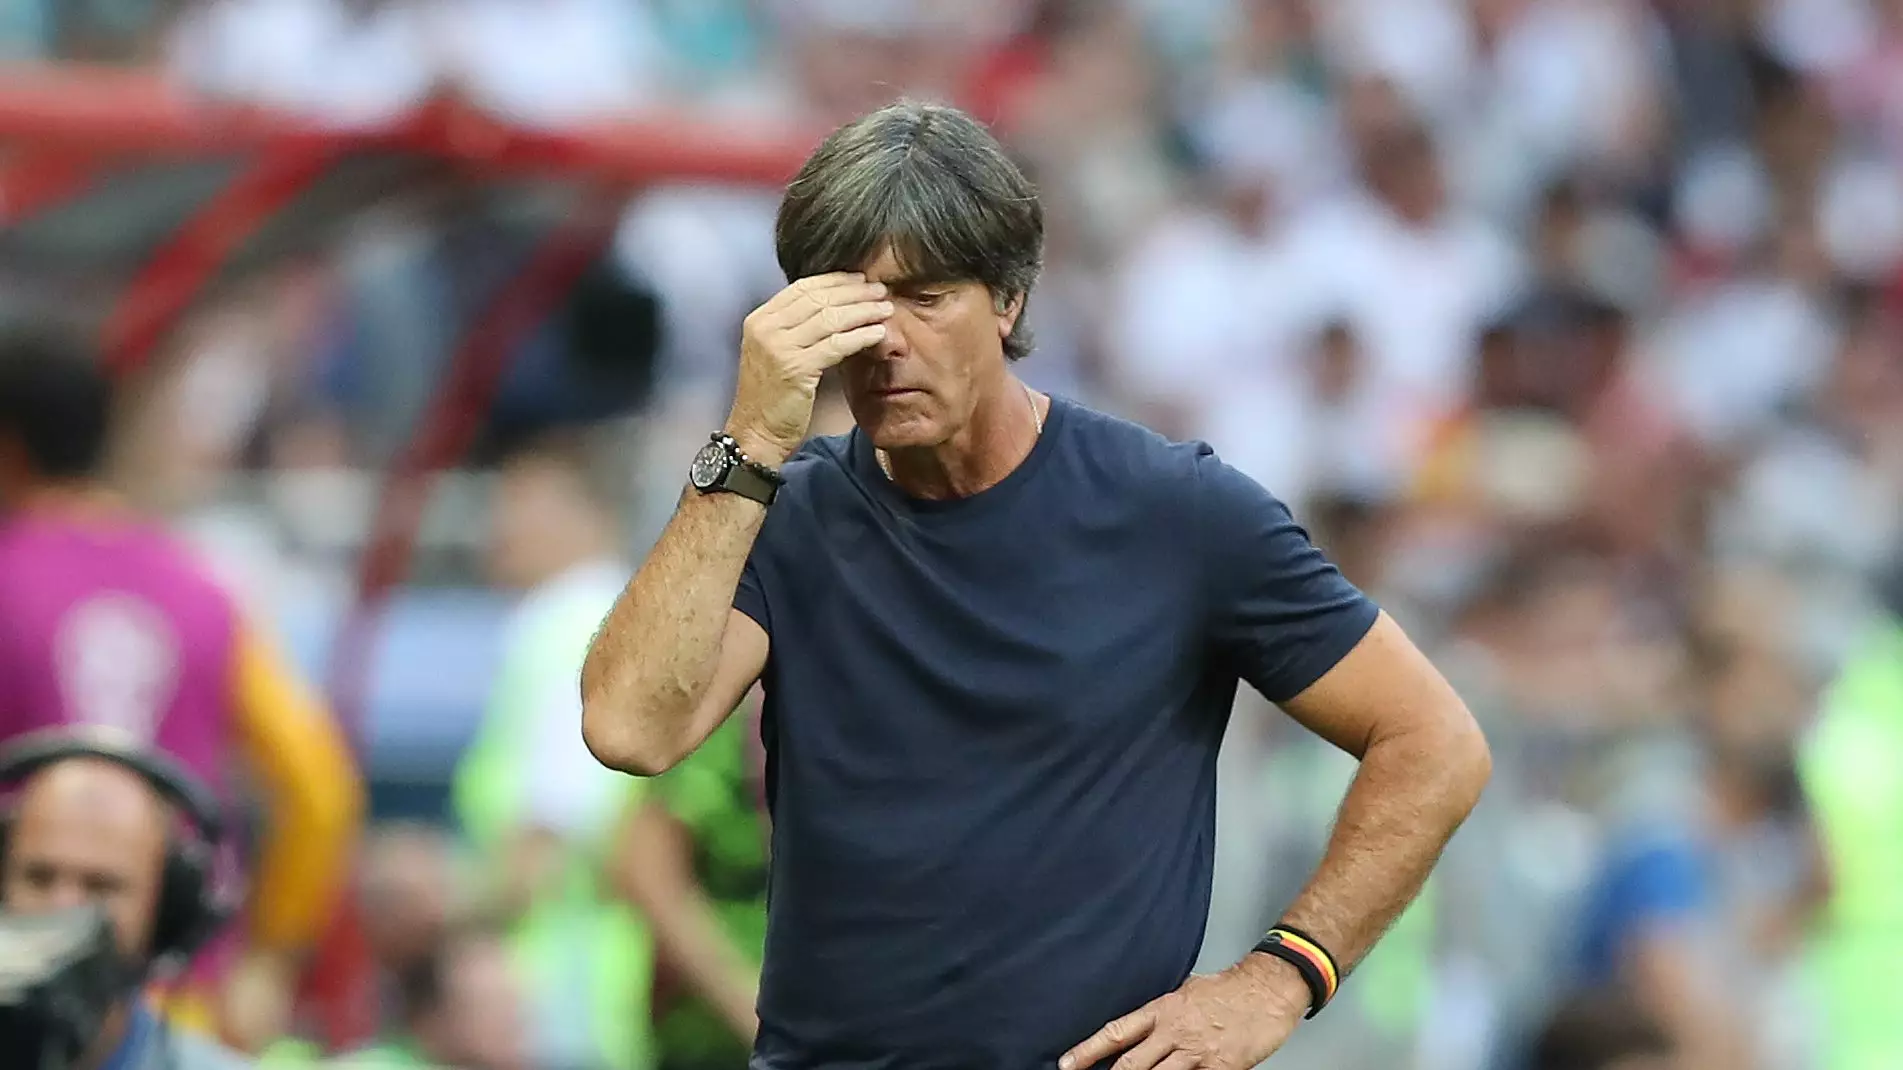 Pornhub Throws Shade At Germany After World Cup Performance